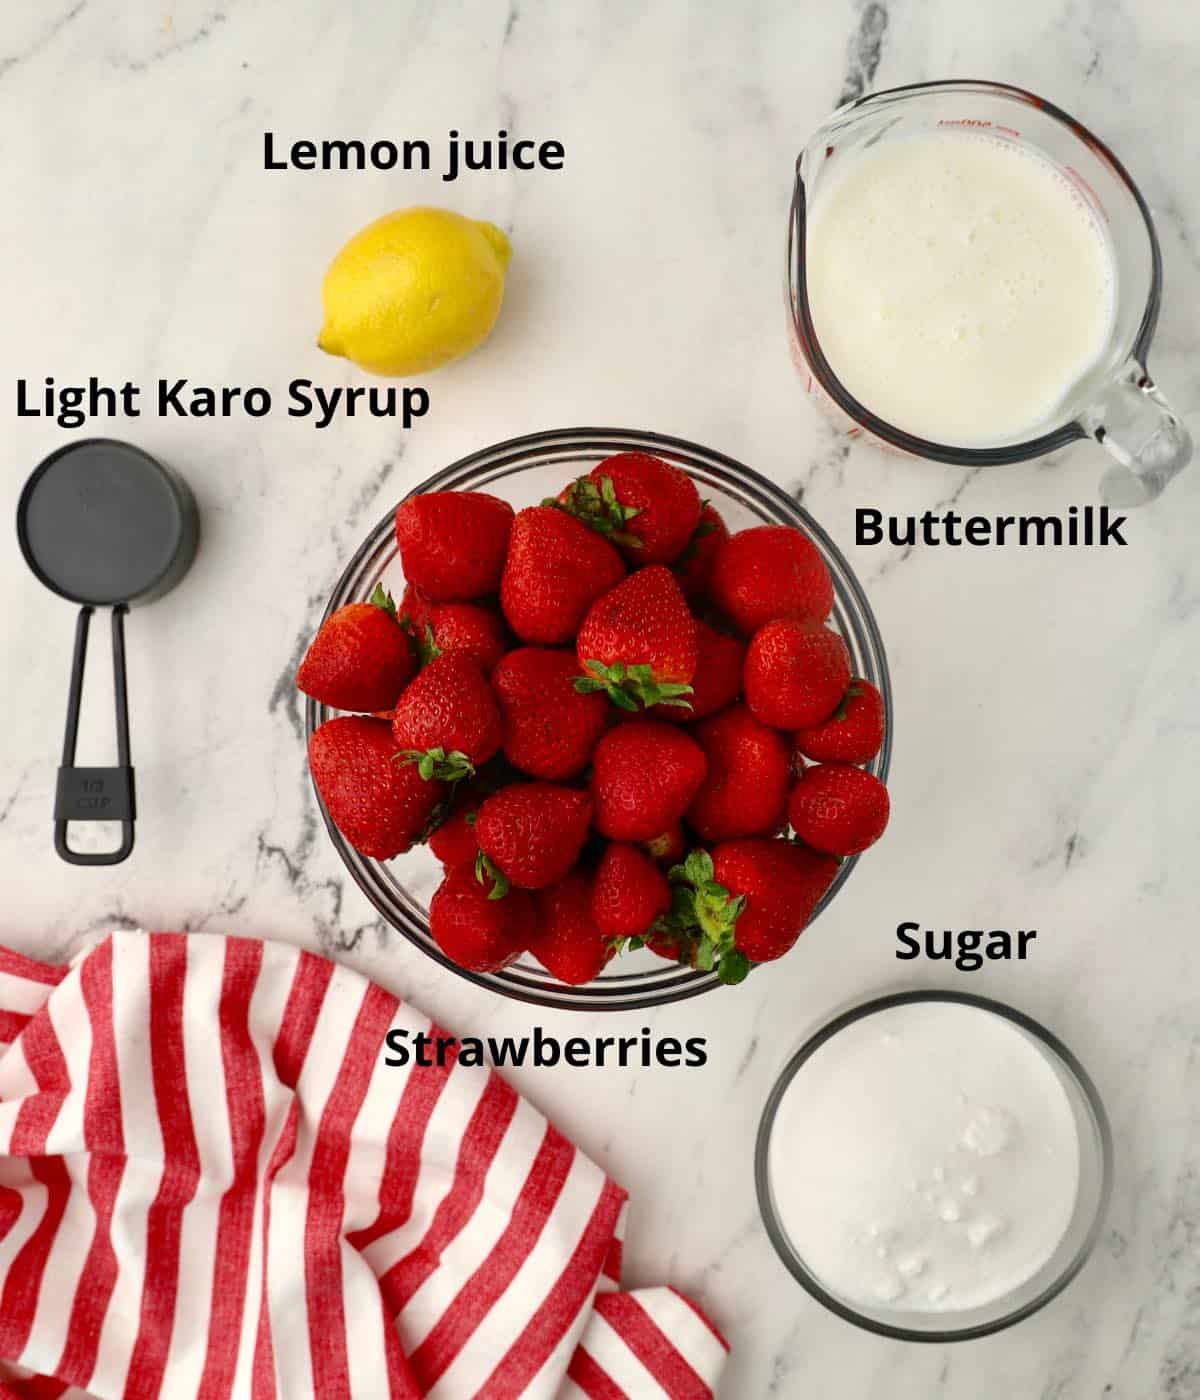 A large bowl of strawberries plus other ingredients to make ice cream.